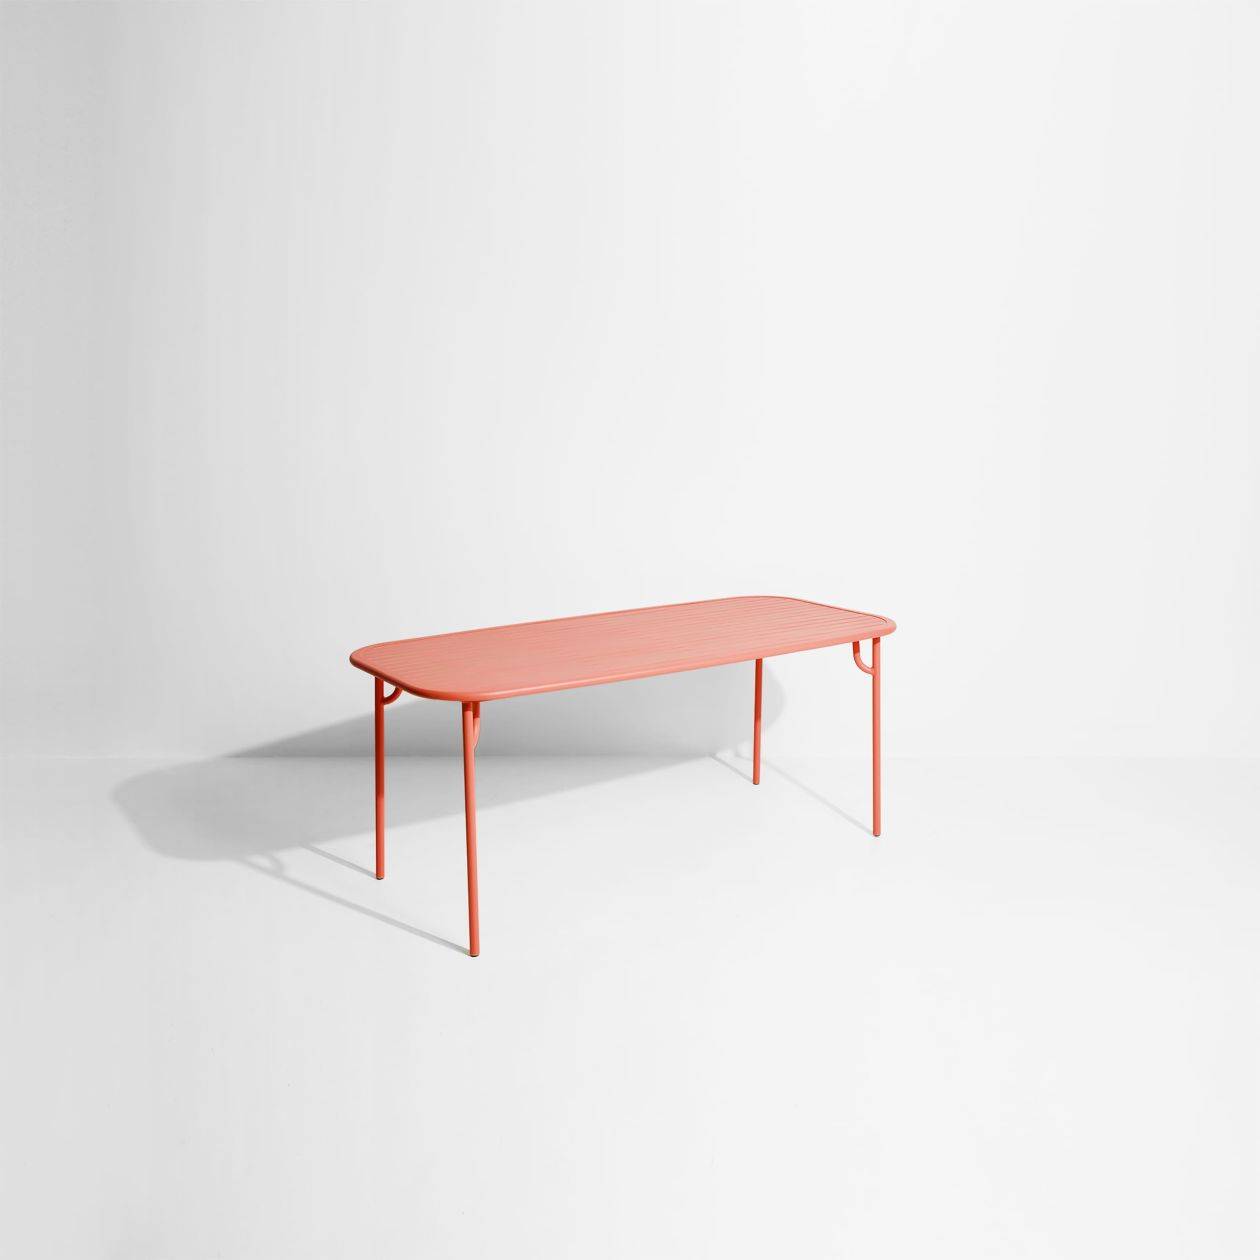 Week-End Medium Rectangular Dining Table with slats - Coral